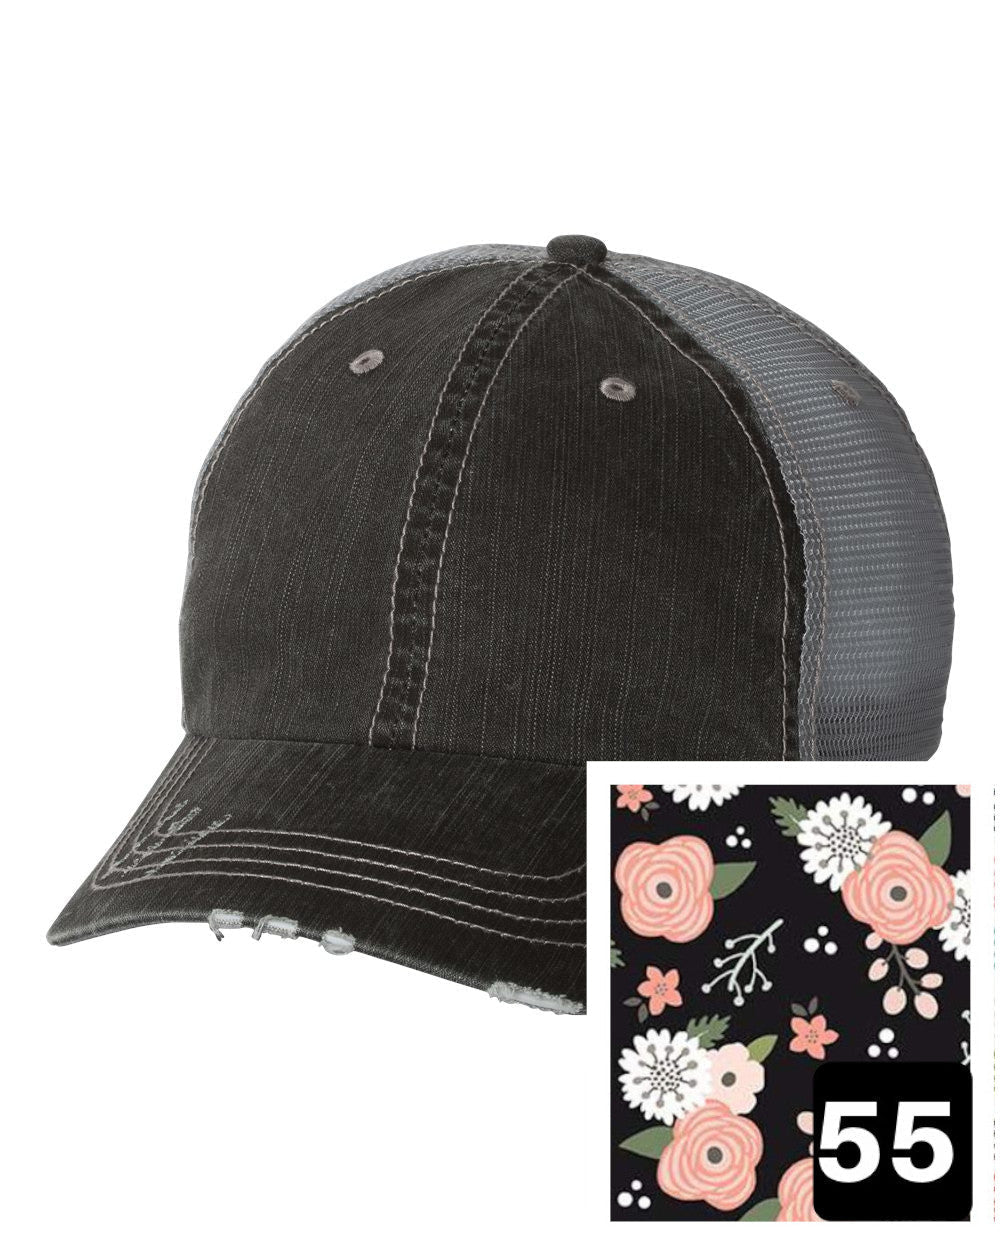 gray distressed trucker hat with petite floral on navy fabric state of Oklahoma